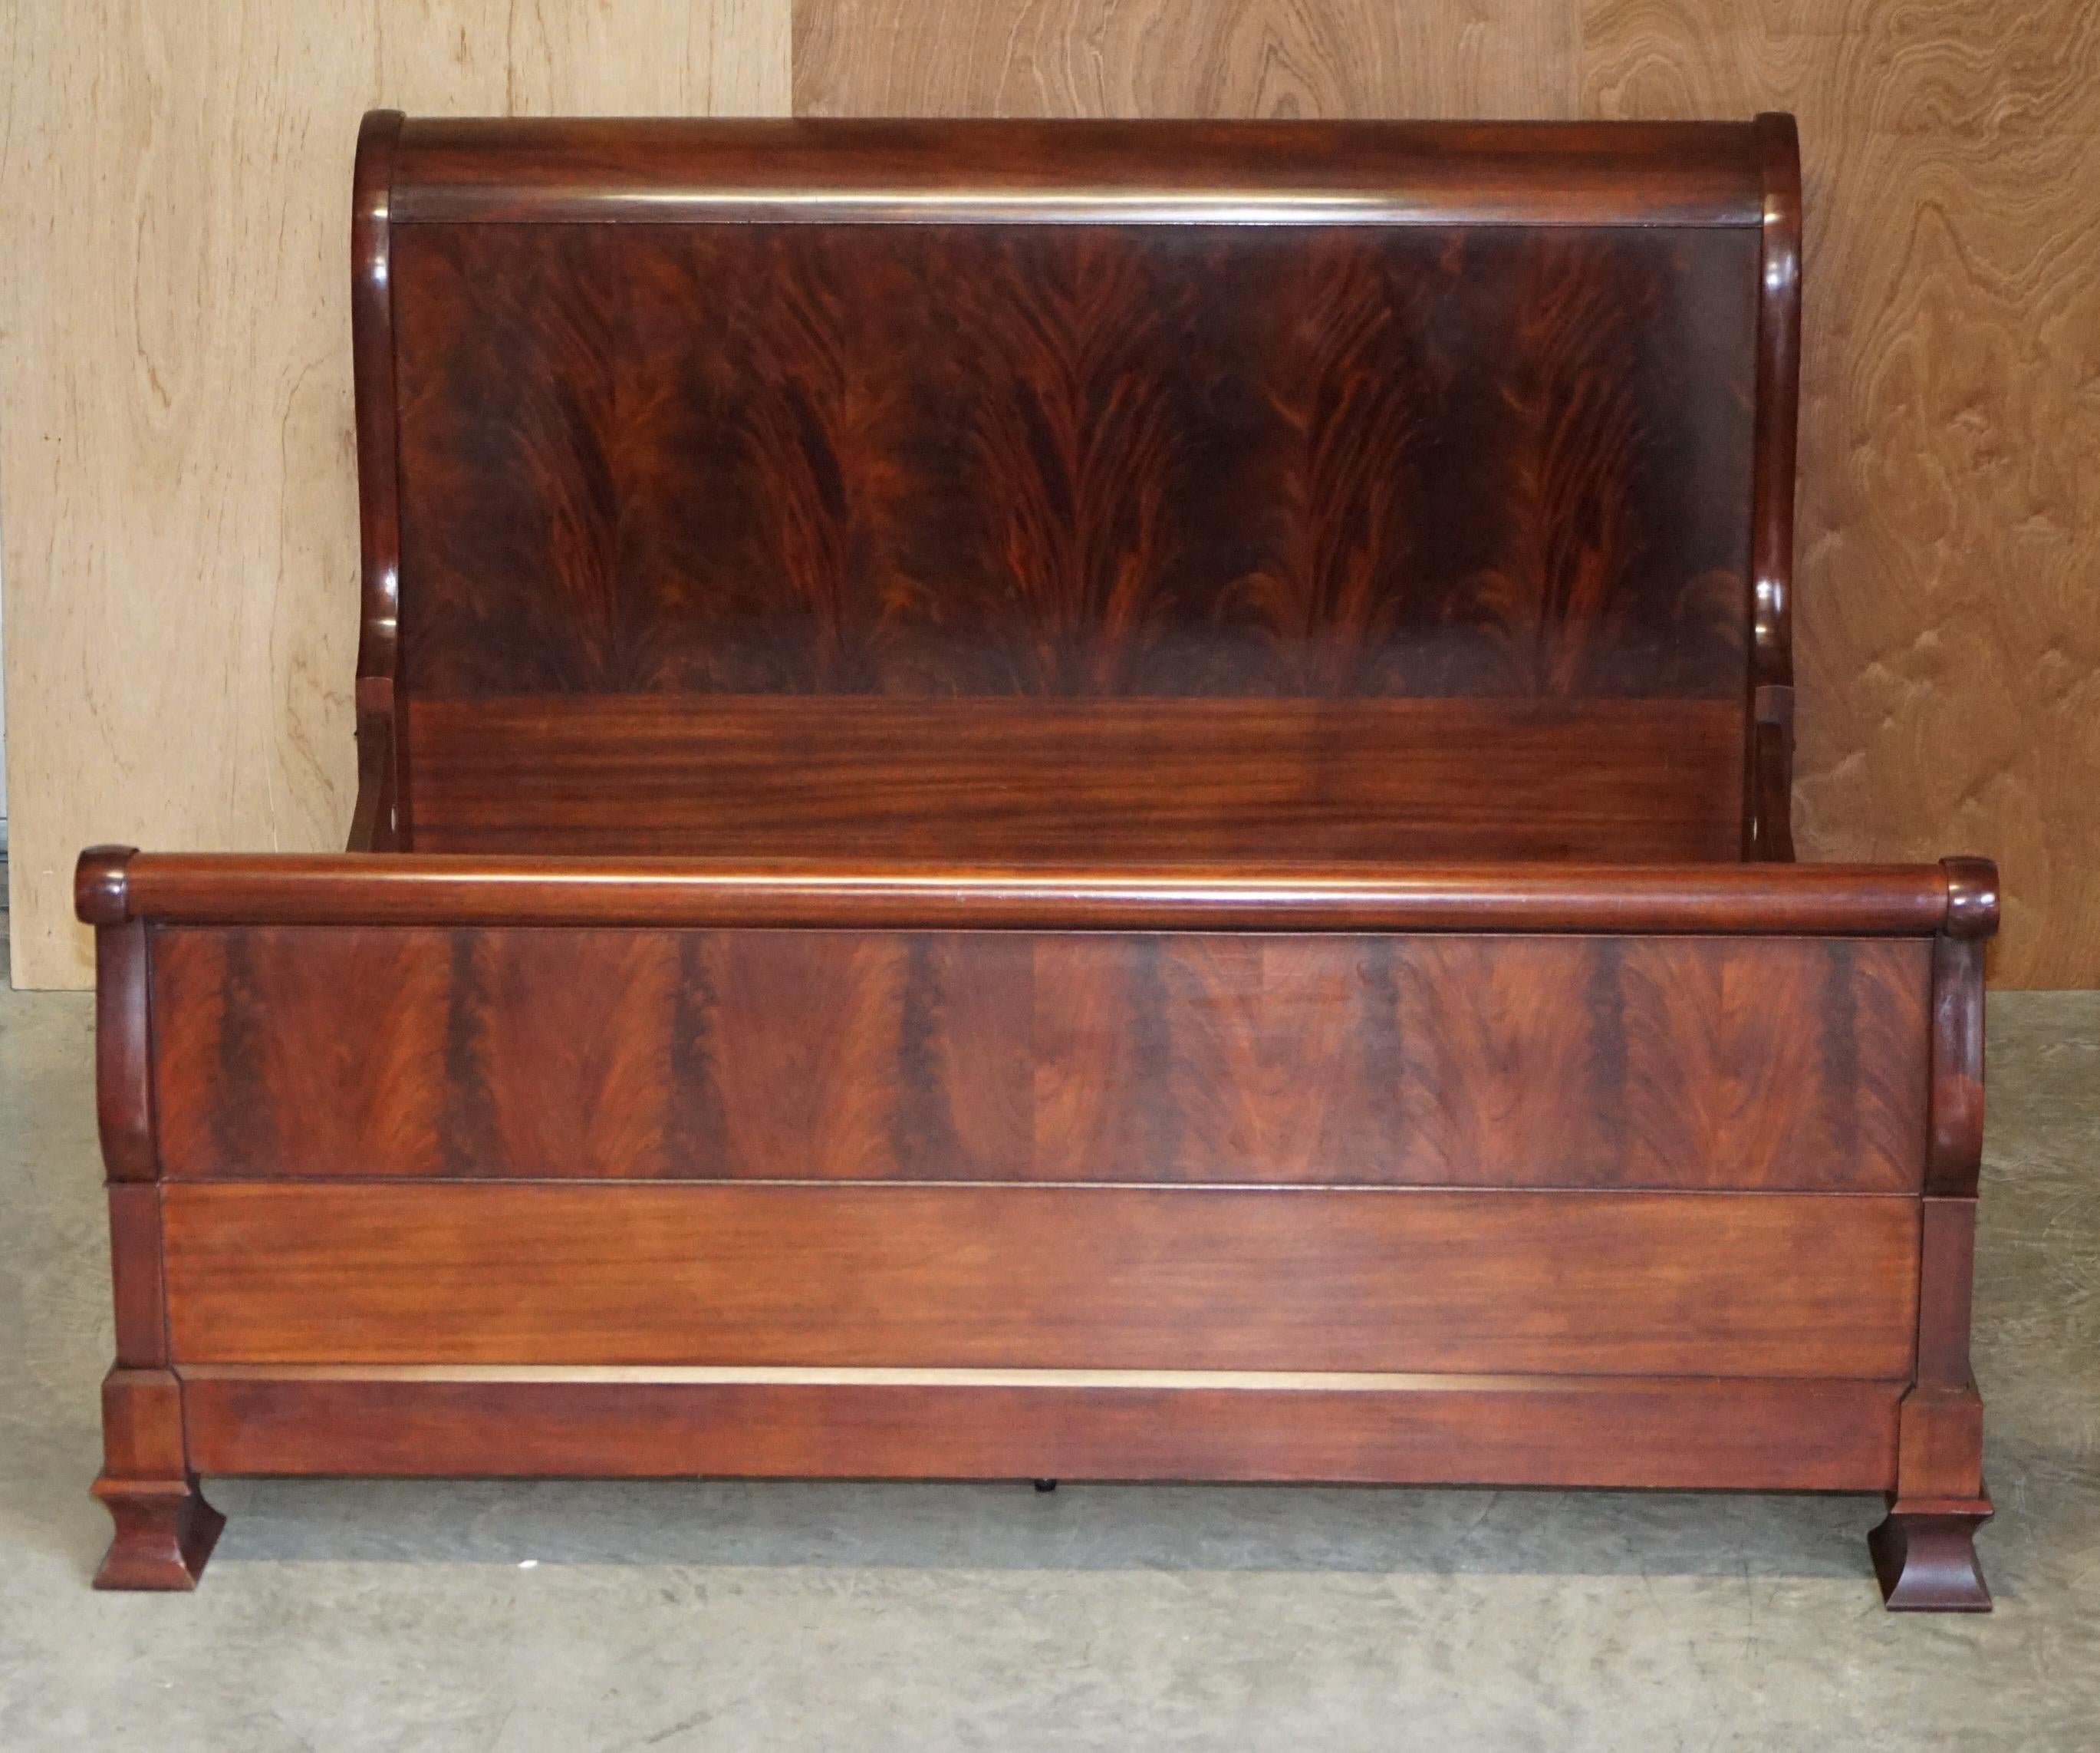 We are delighted to offer for sale this extremely rare, exquisite quality, larger than a California king, Flamed American Mahogany sleigh bed from Ralph Lauren

This bed truly is stupendous, the timber patina and grain is sublime and in strong